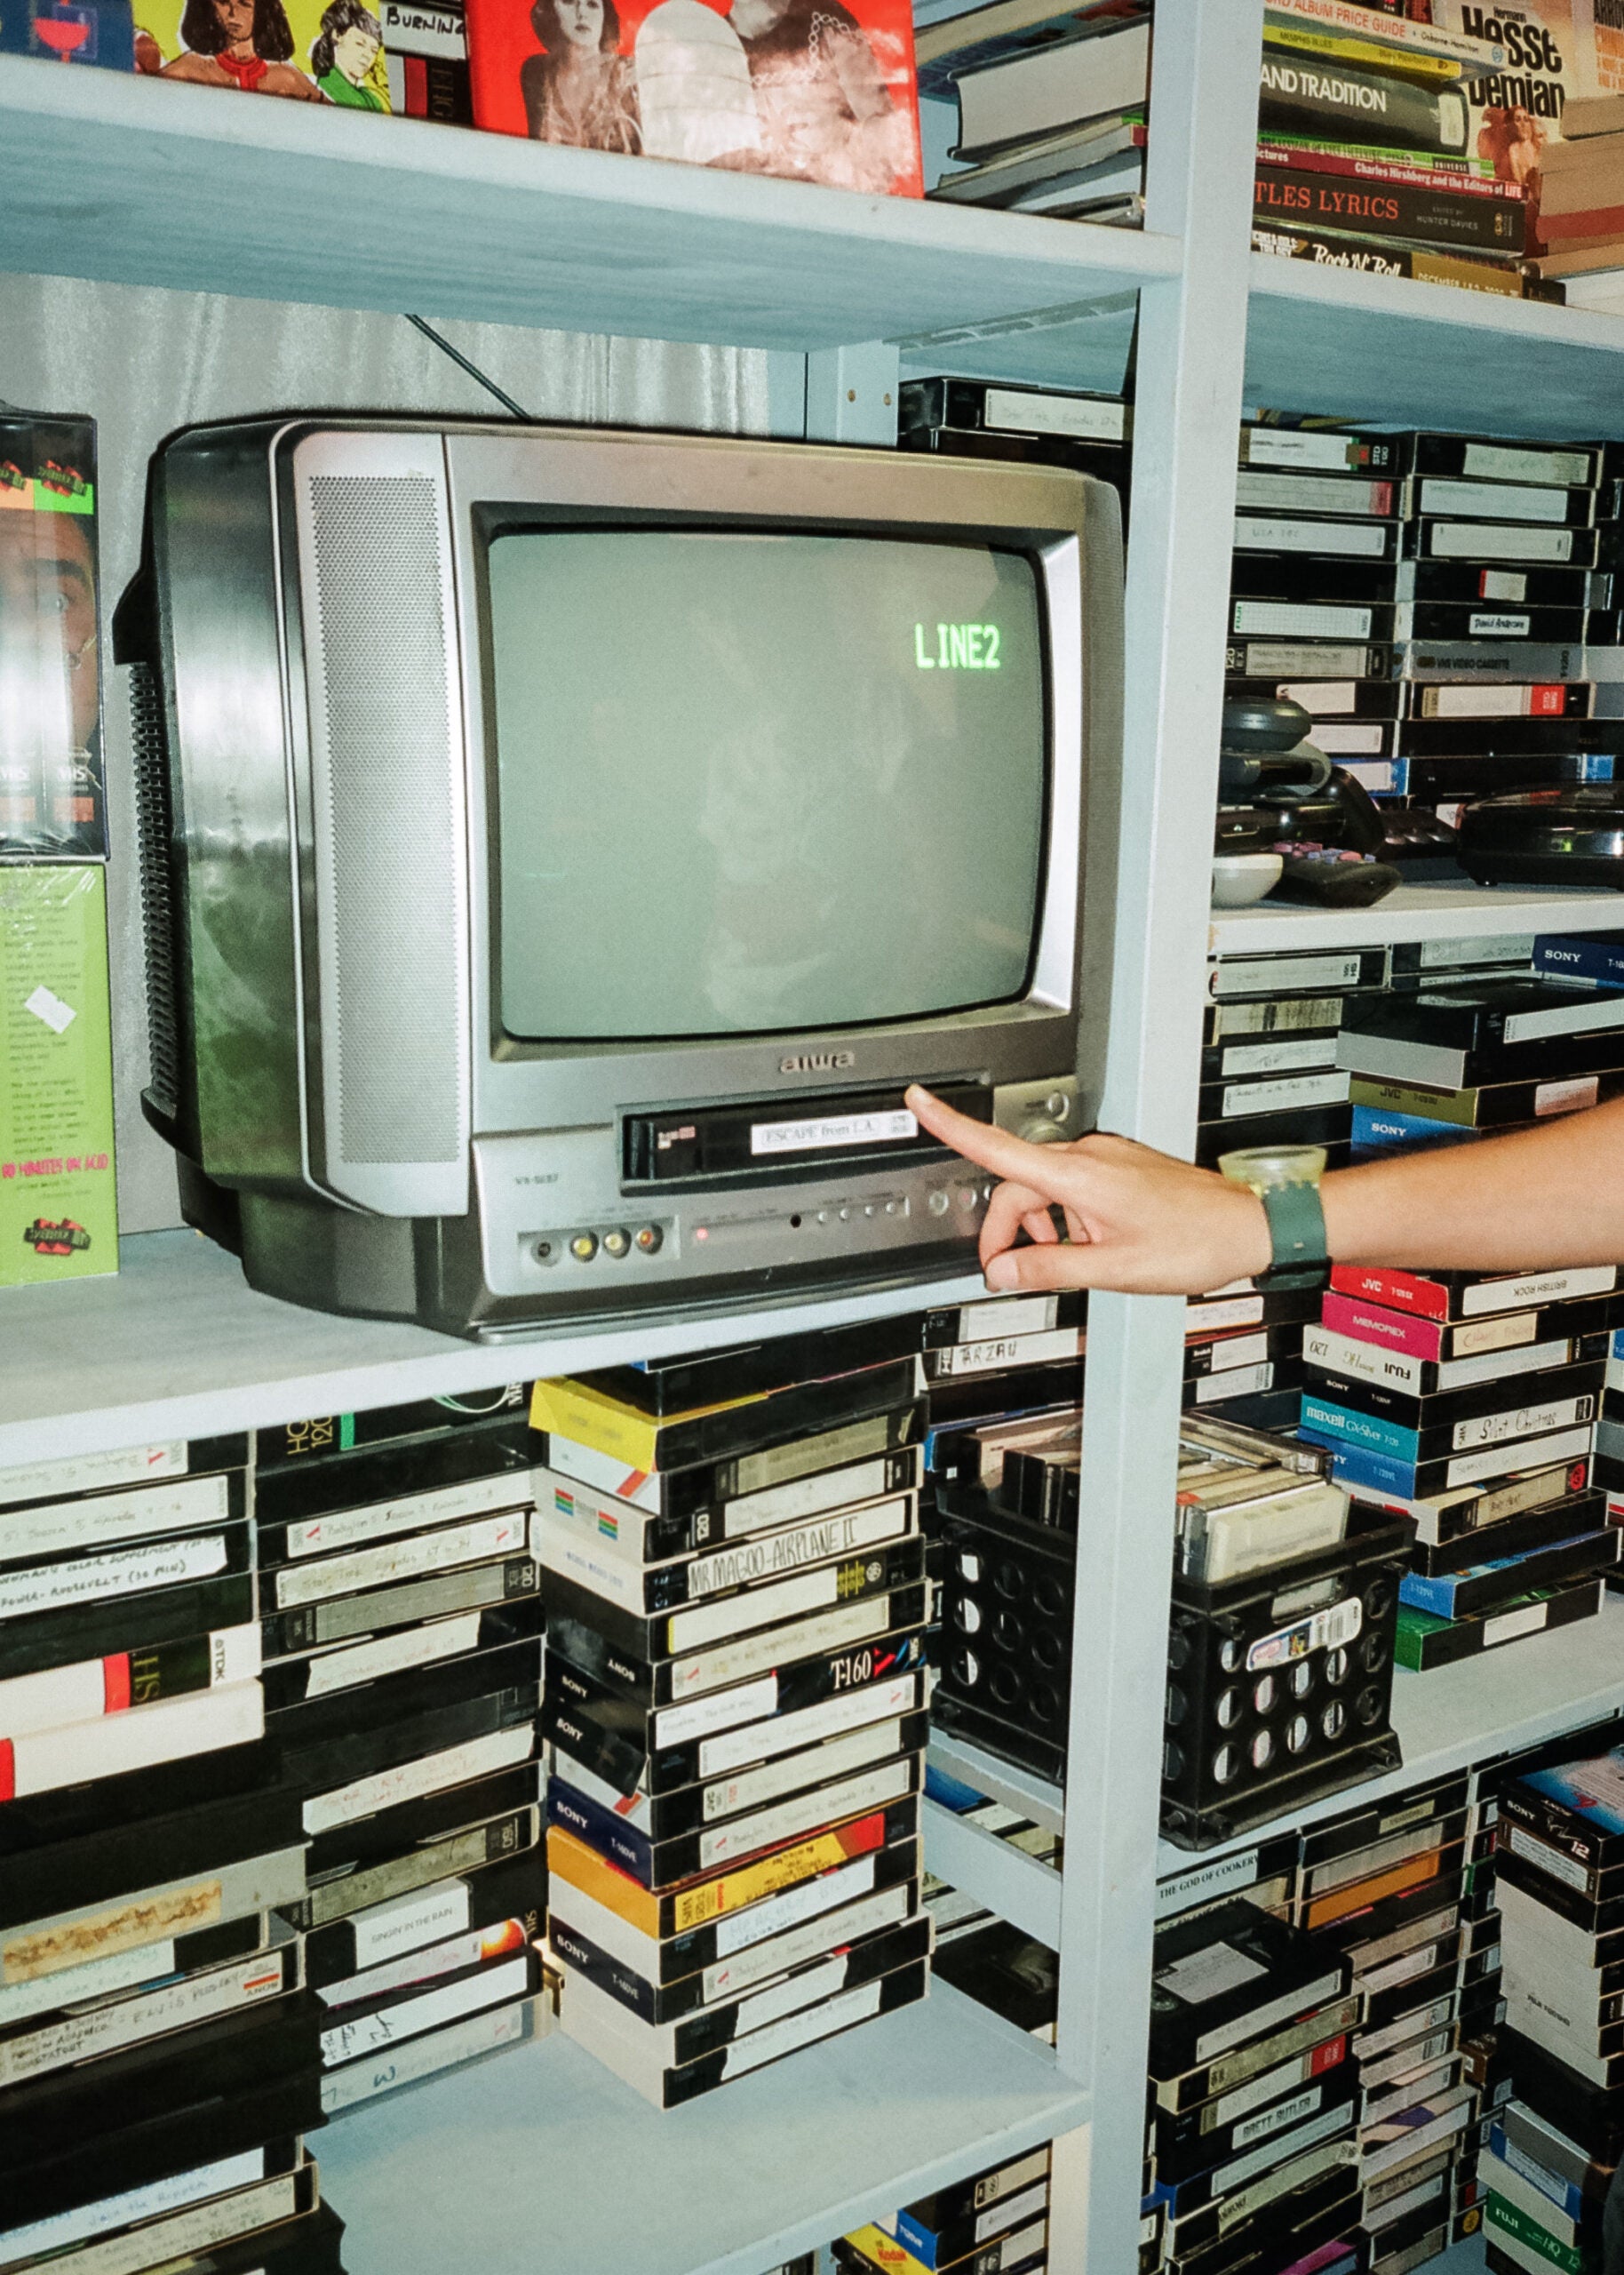 Whammy! founder Jessica Gonzales loads one of many VCR TVs at the used tape shop in Echo Park.